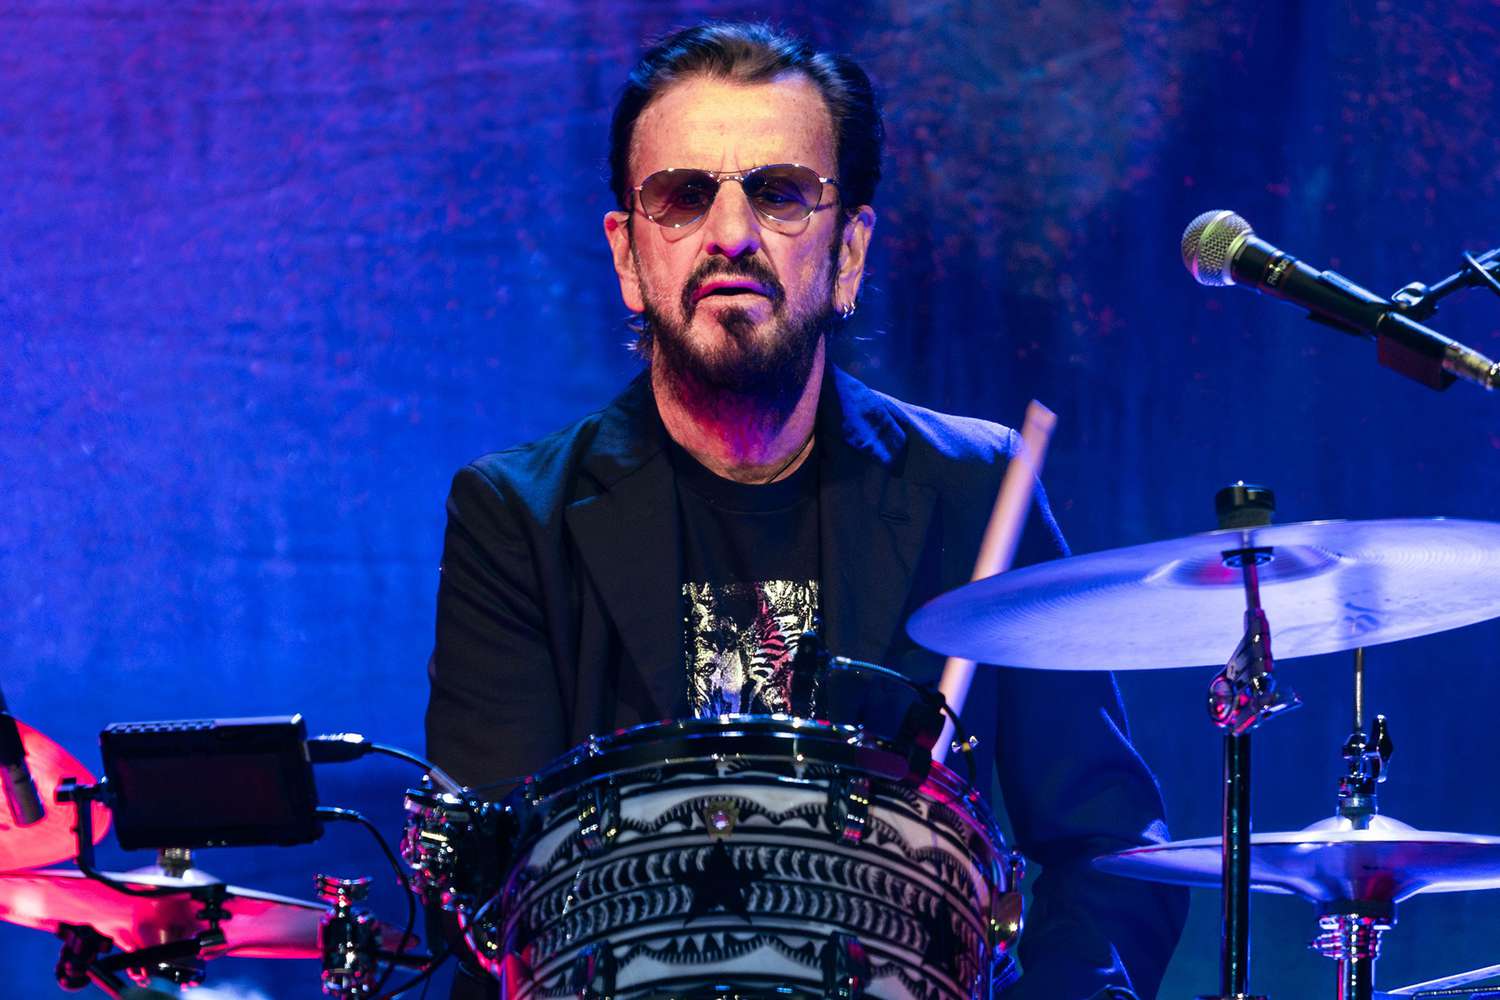 Ringo Starr falls on stage while performing ‘Give Peace a Chance’